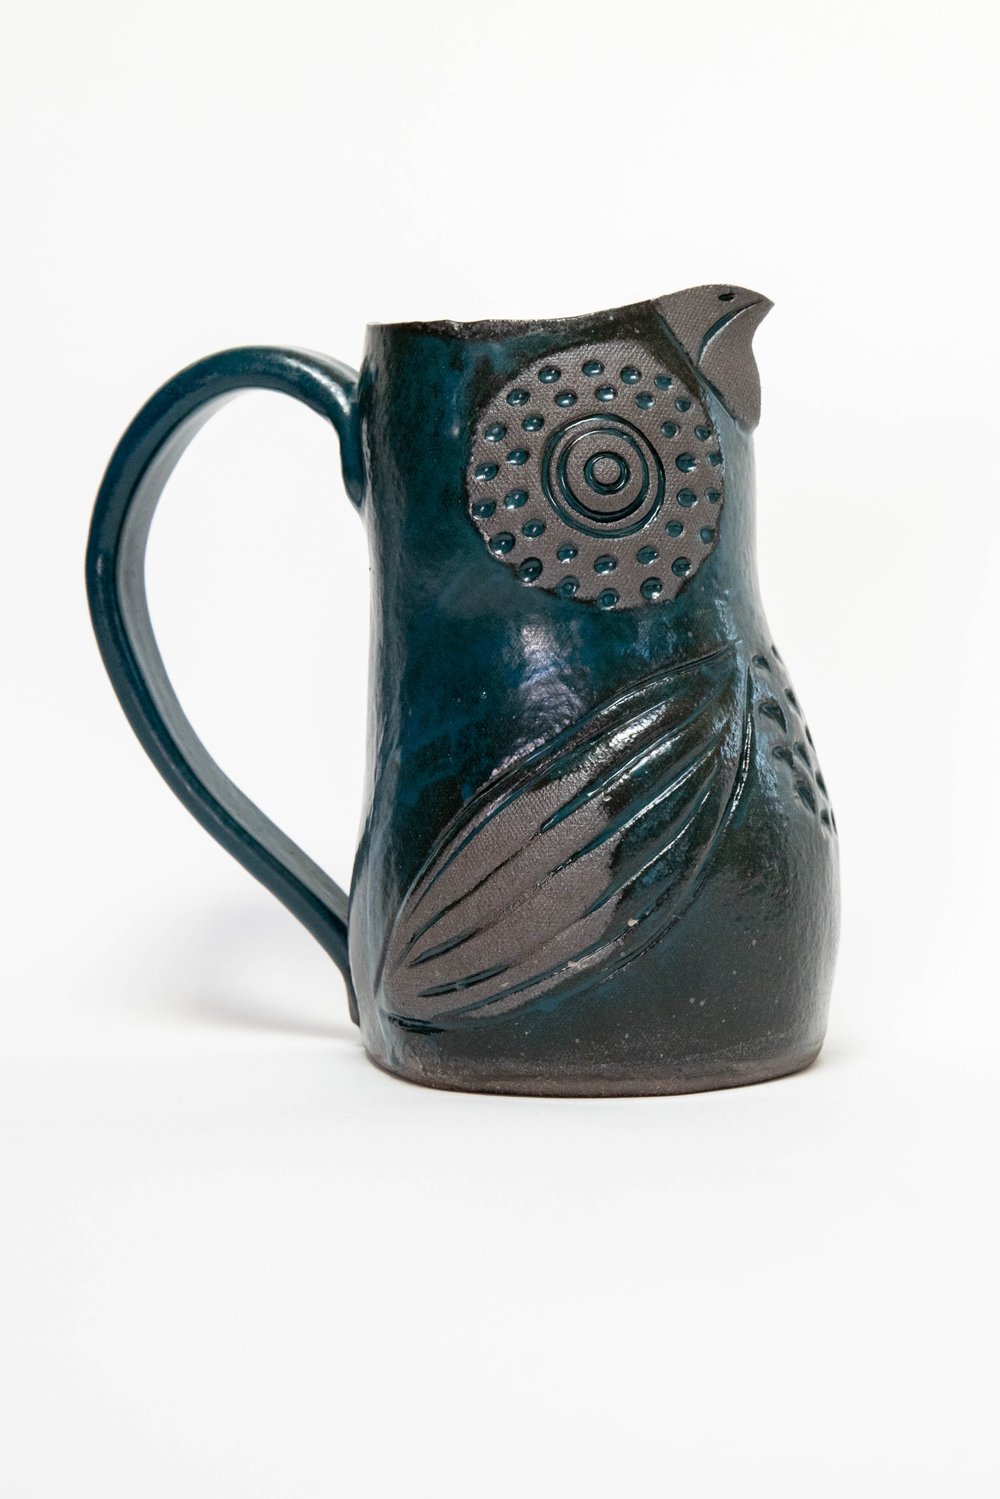 Image of Large Dark Teal Dotted Owl Bird Pitcher